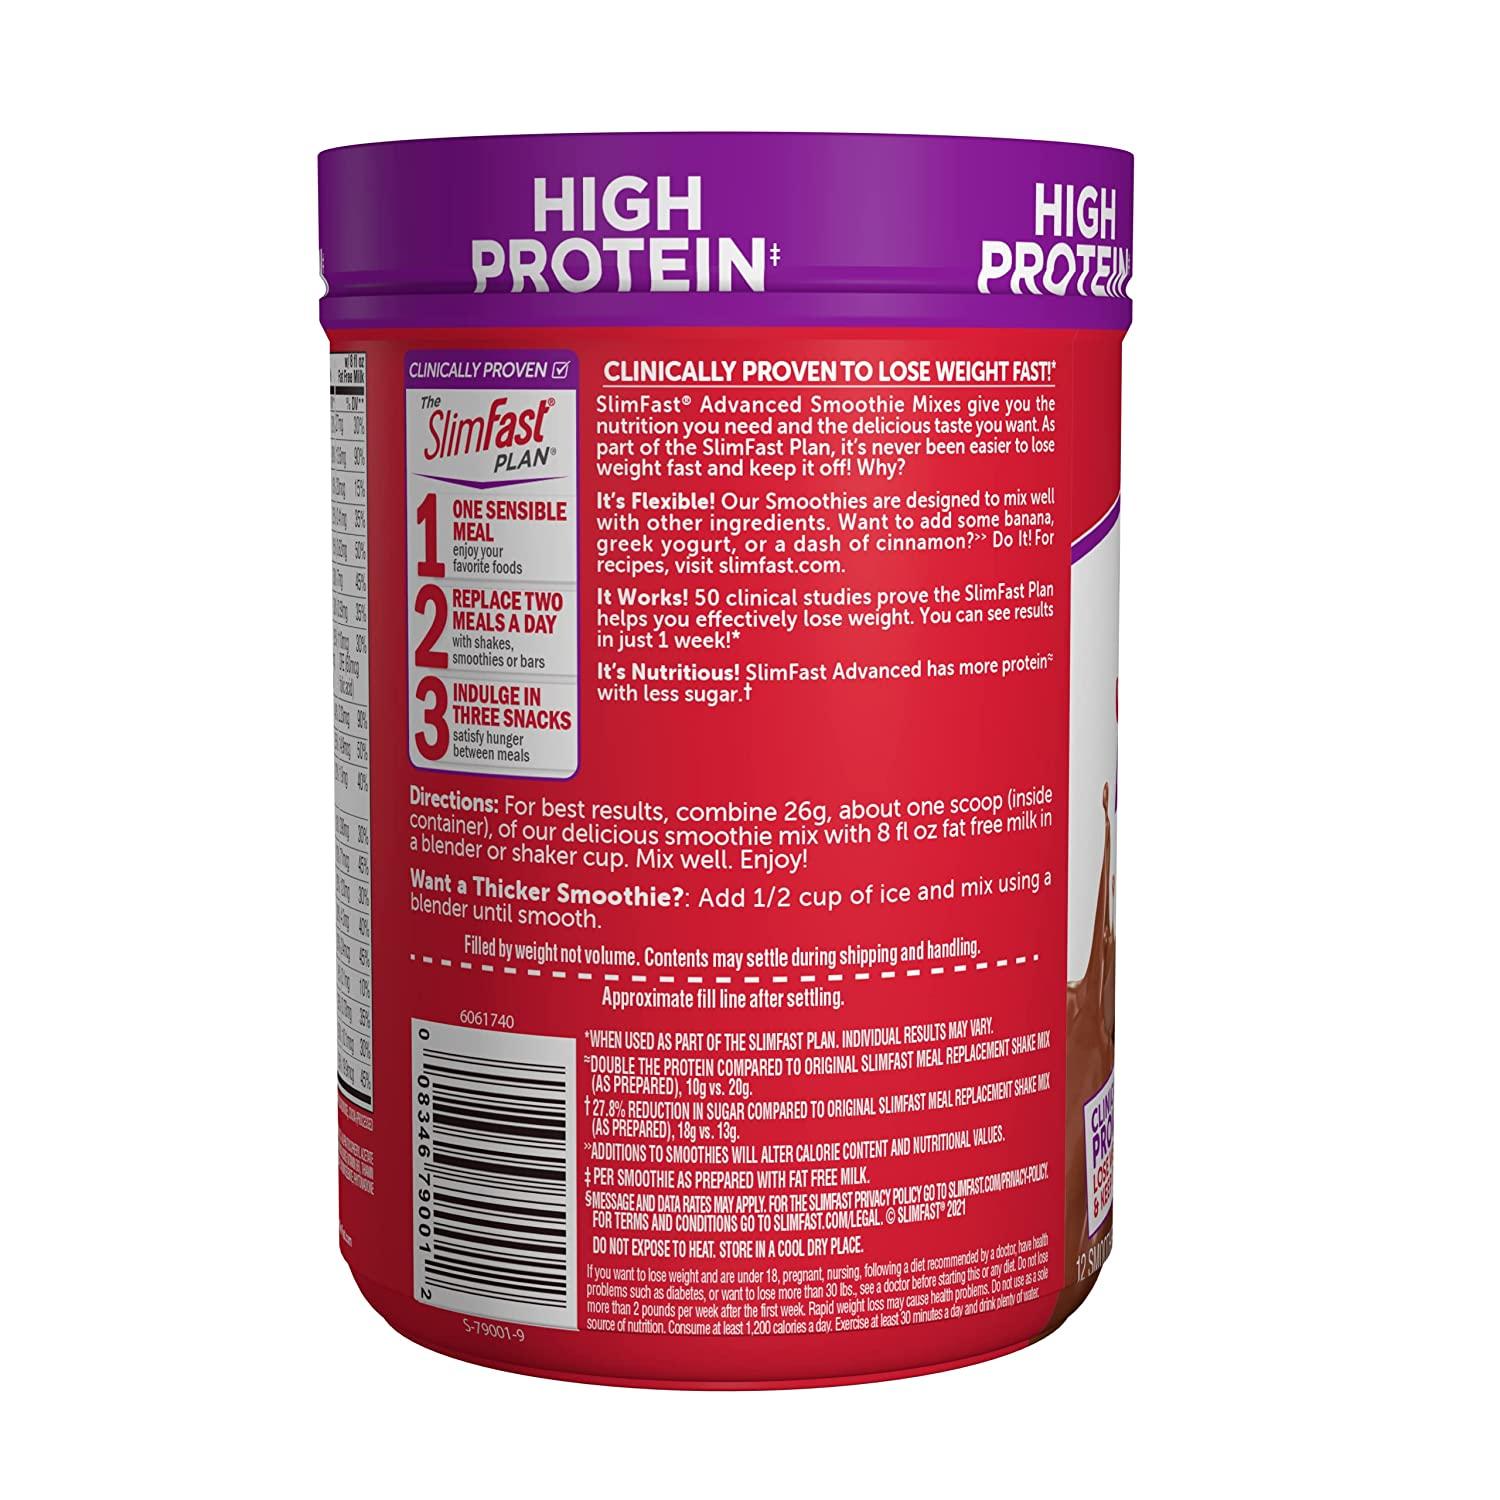 Slimfast Advanced Nutrition Creamy Chocolate High Protein Smoothie - 11.01 oz canister